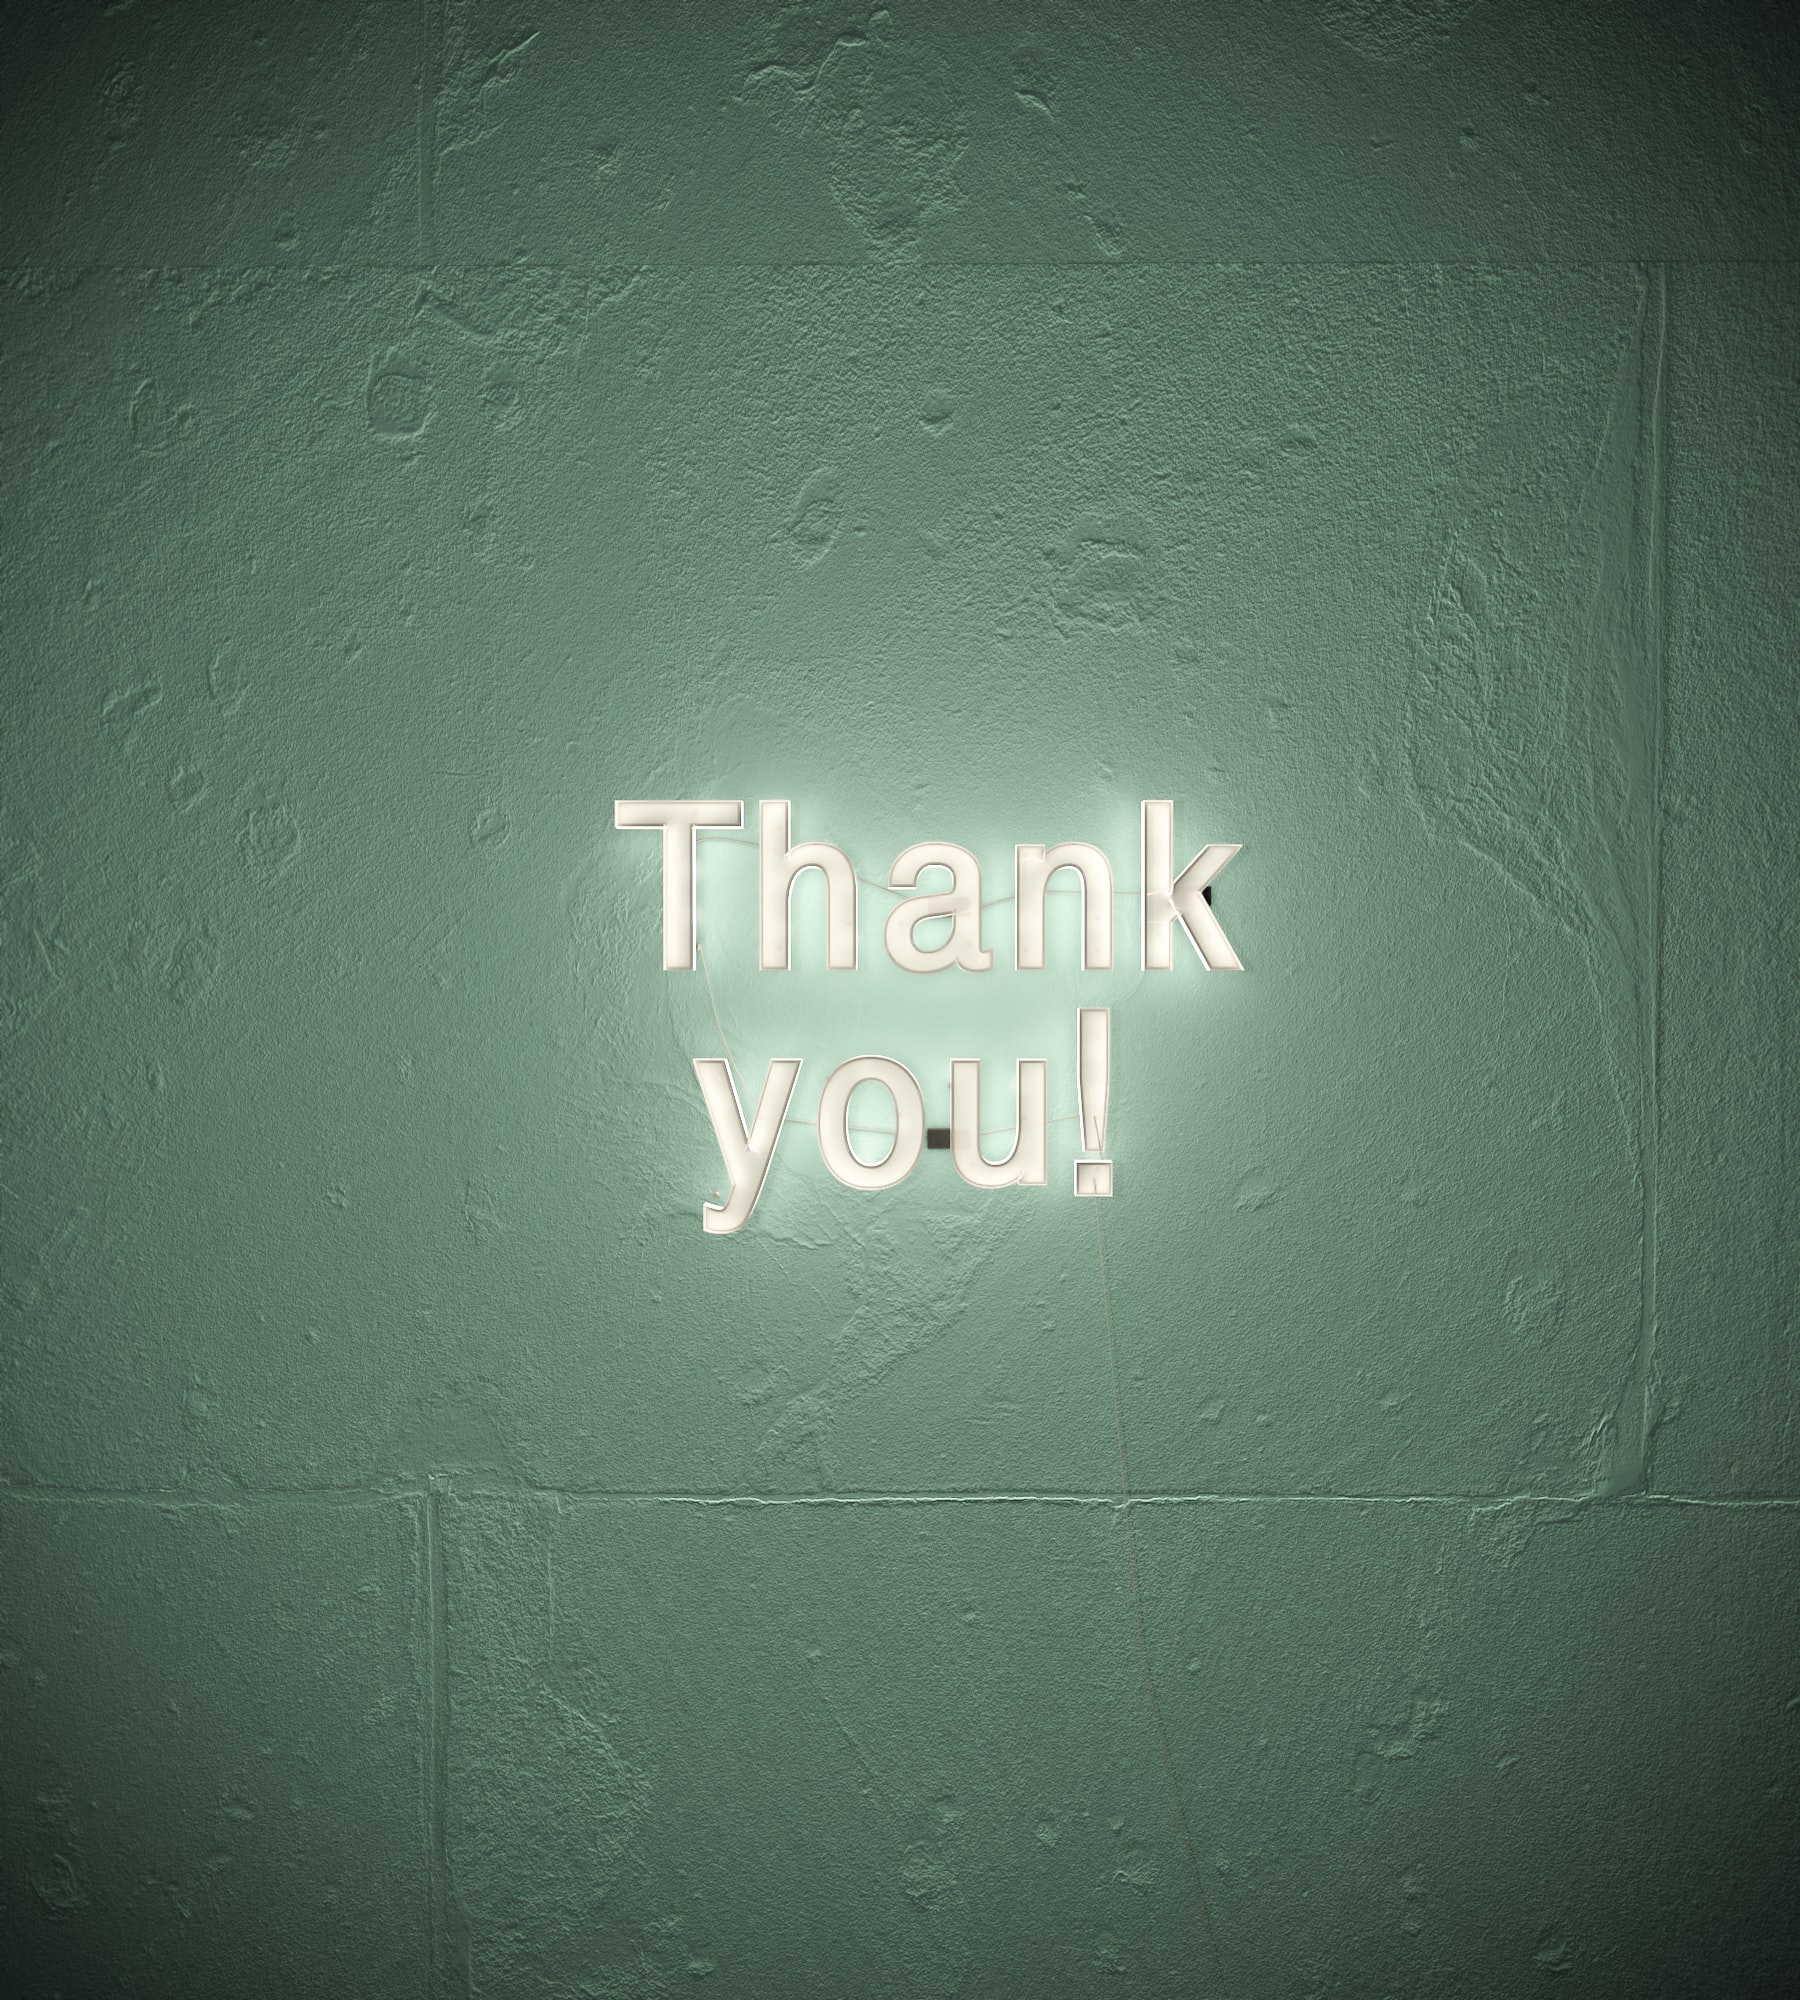 Thank you sign on wall